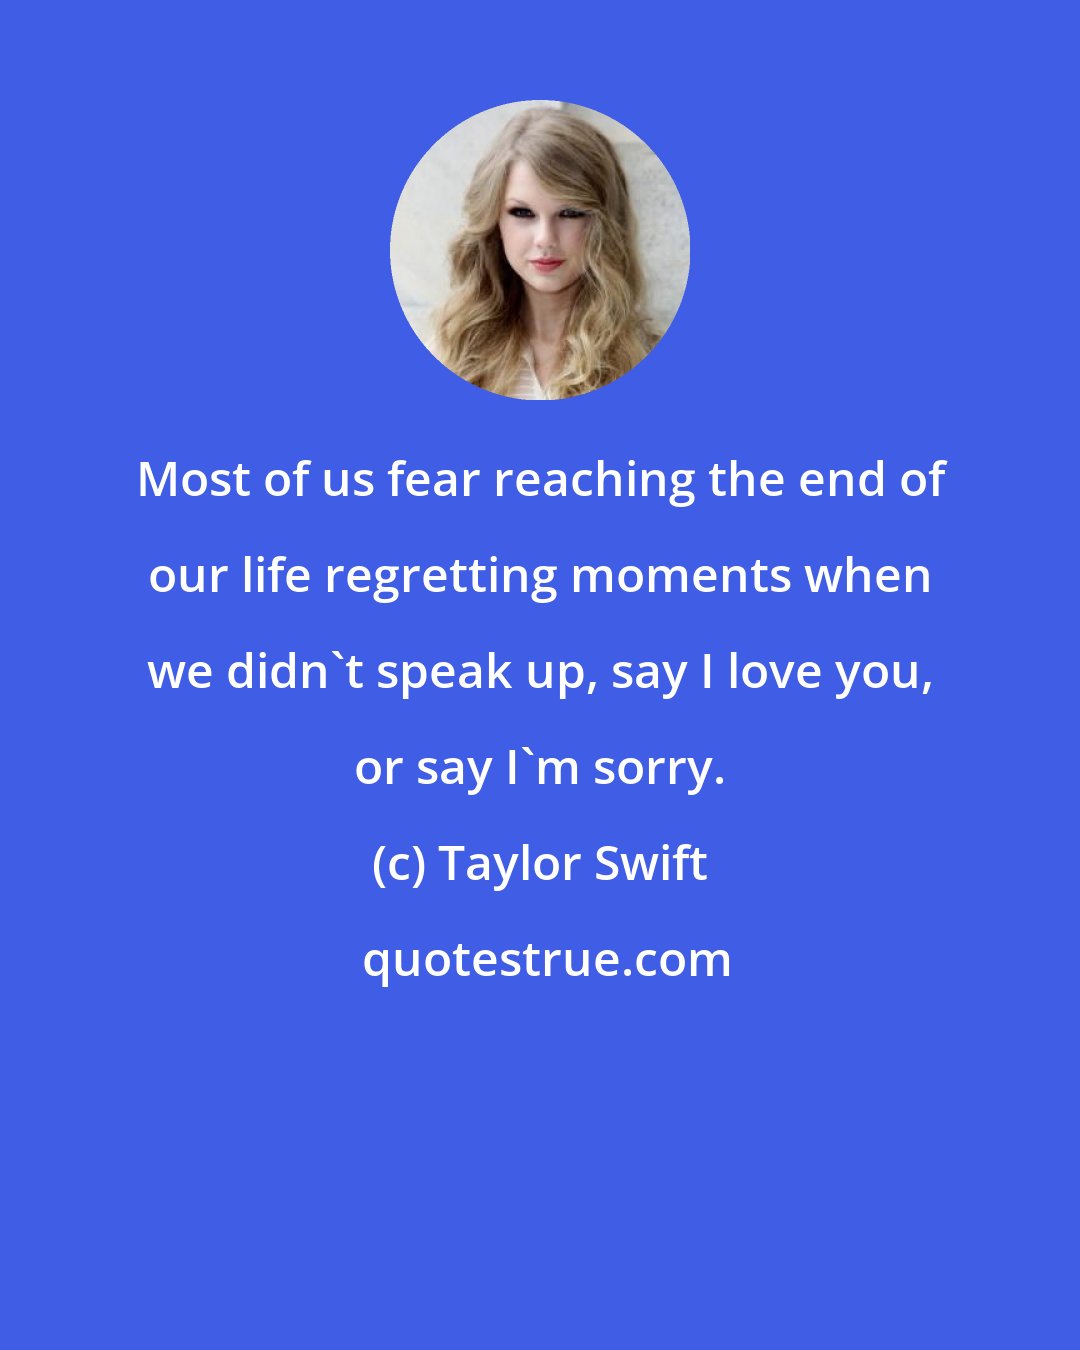 Taylor Swift: Most of us fear reaching the end of our life regretting moments when we didn't speak up, say I love you, or say I'm sorry.